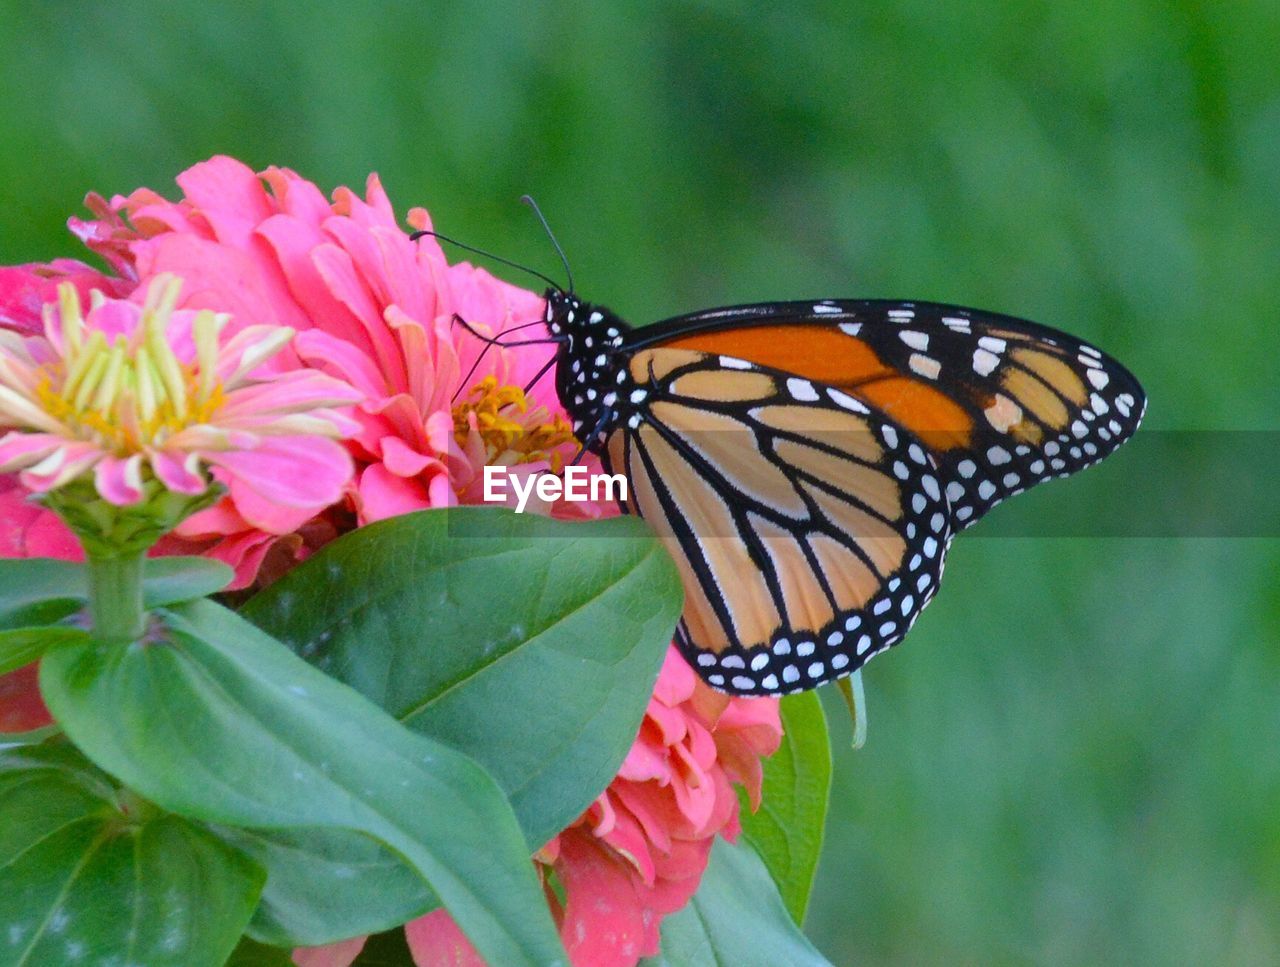 CLOSE-UP OF BUTTERFLY ON PINK FLOWER